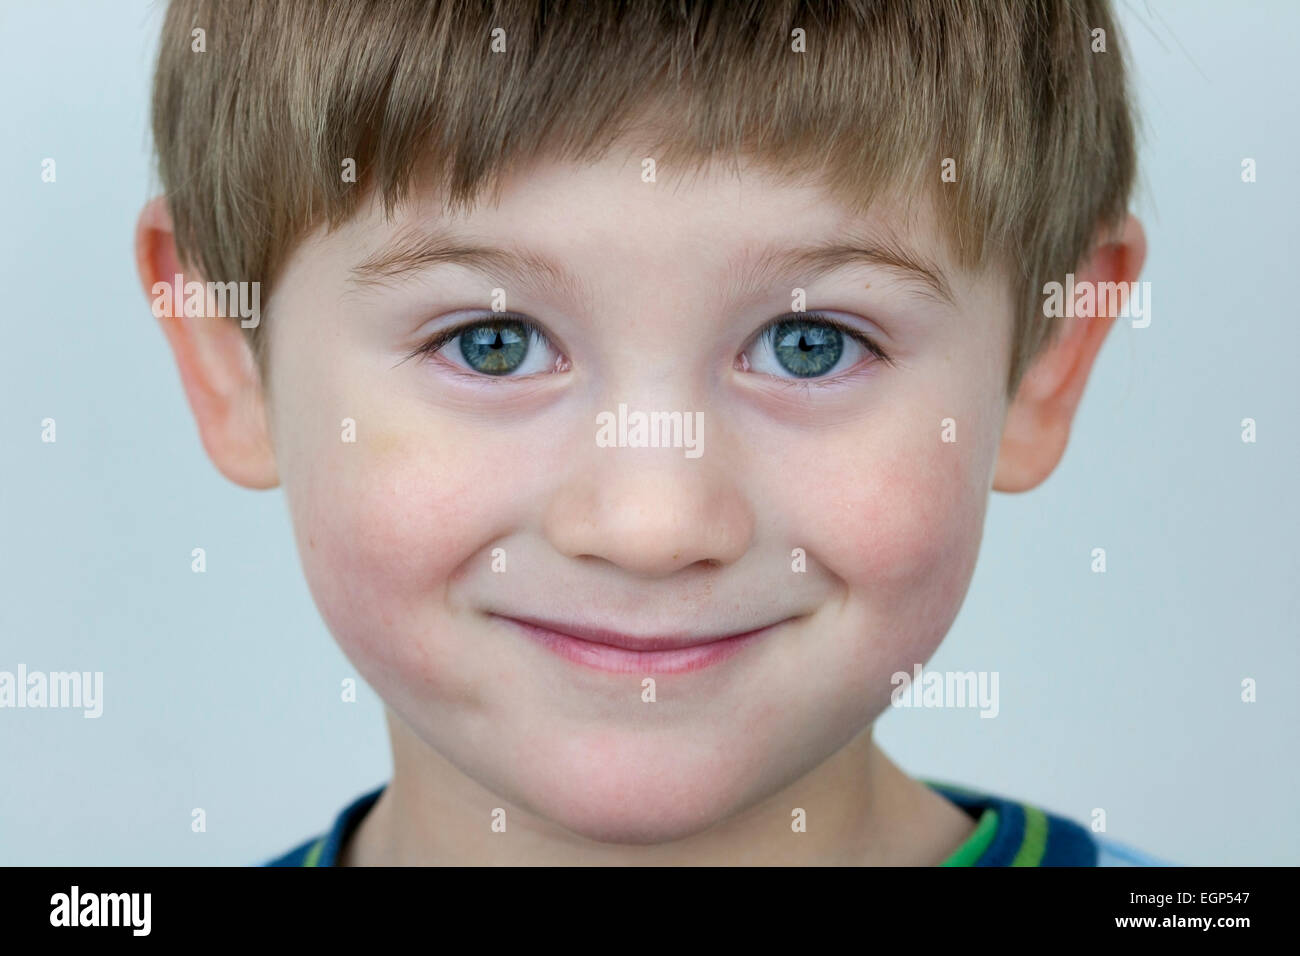 5 year old boy face shots close up questioning expression Stock Photo